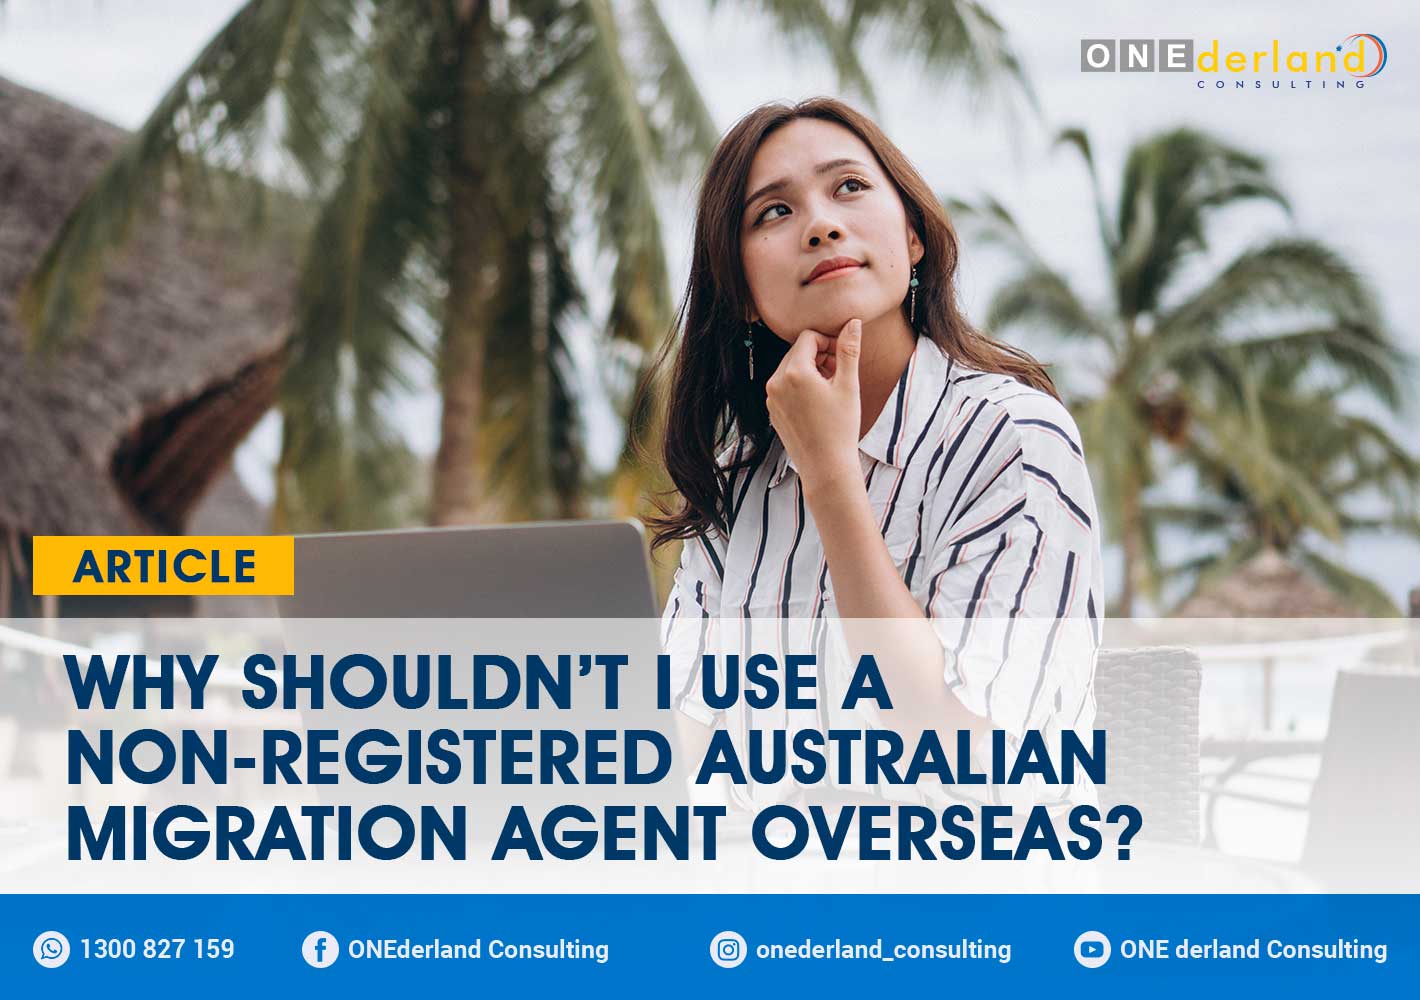 Why Shouldn’t I Use a Non-Registered Australian Migration Agent Overseas